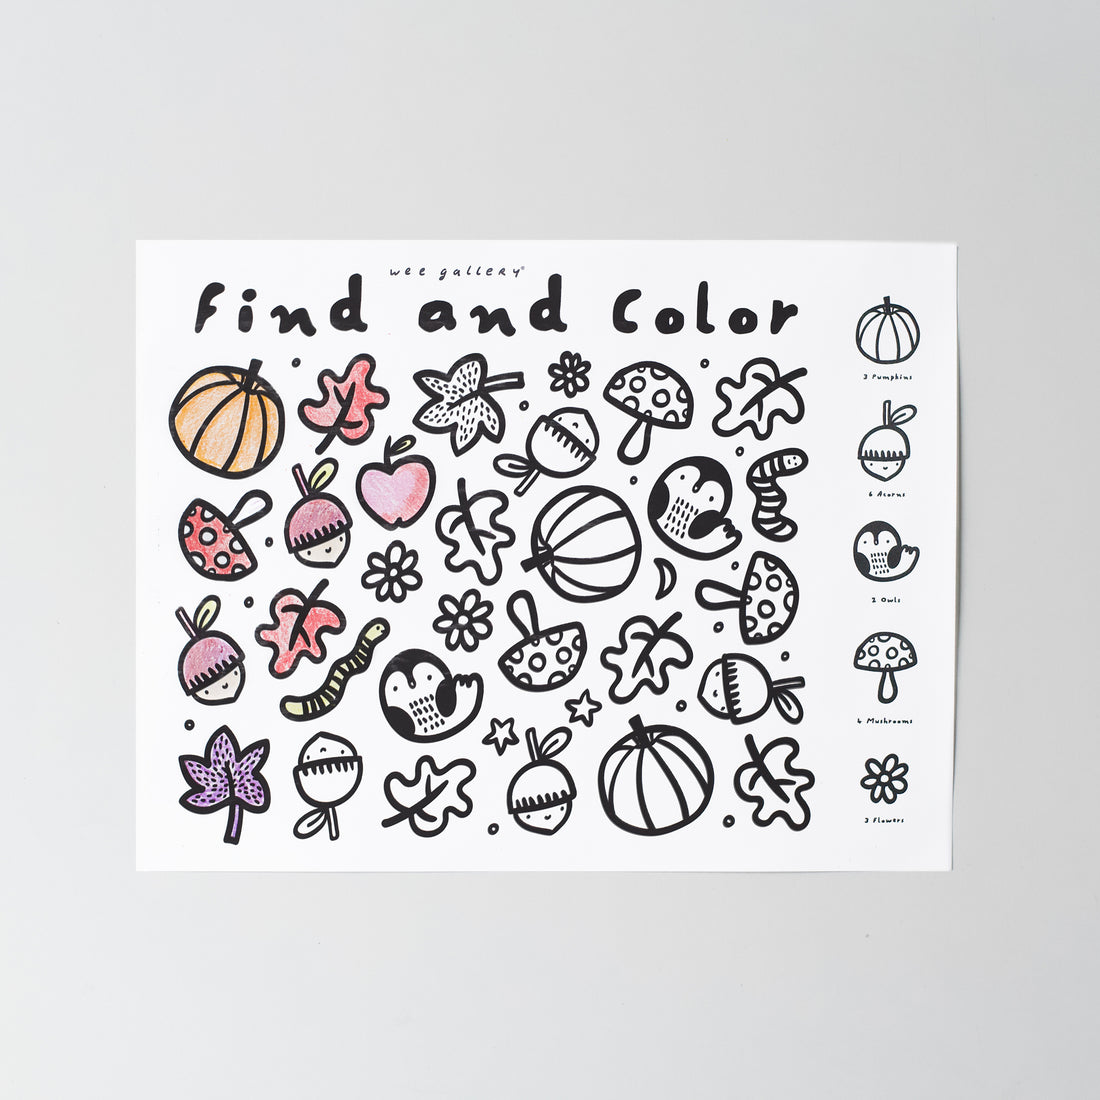 Find and Color Placemat